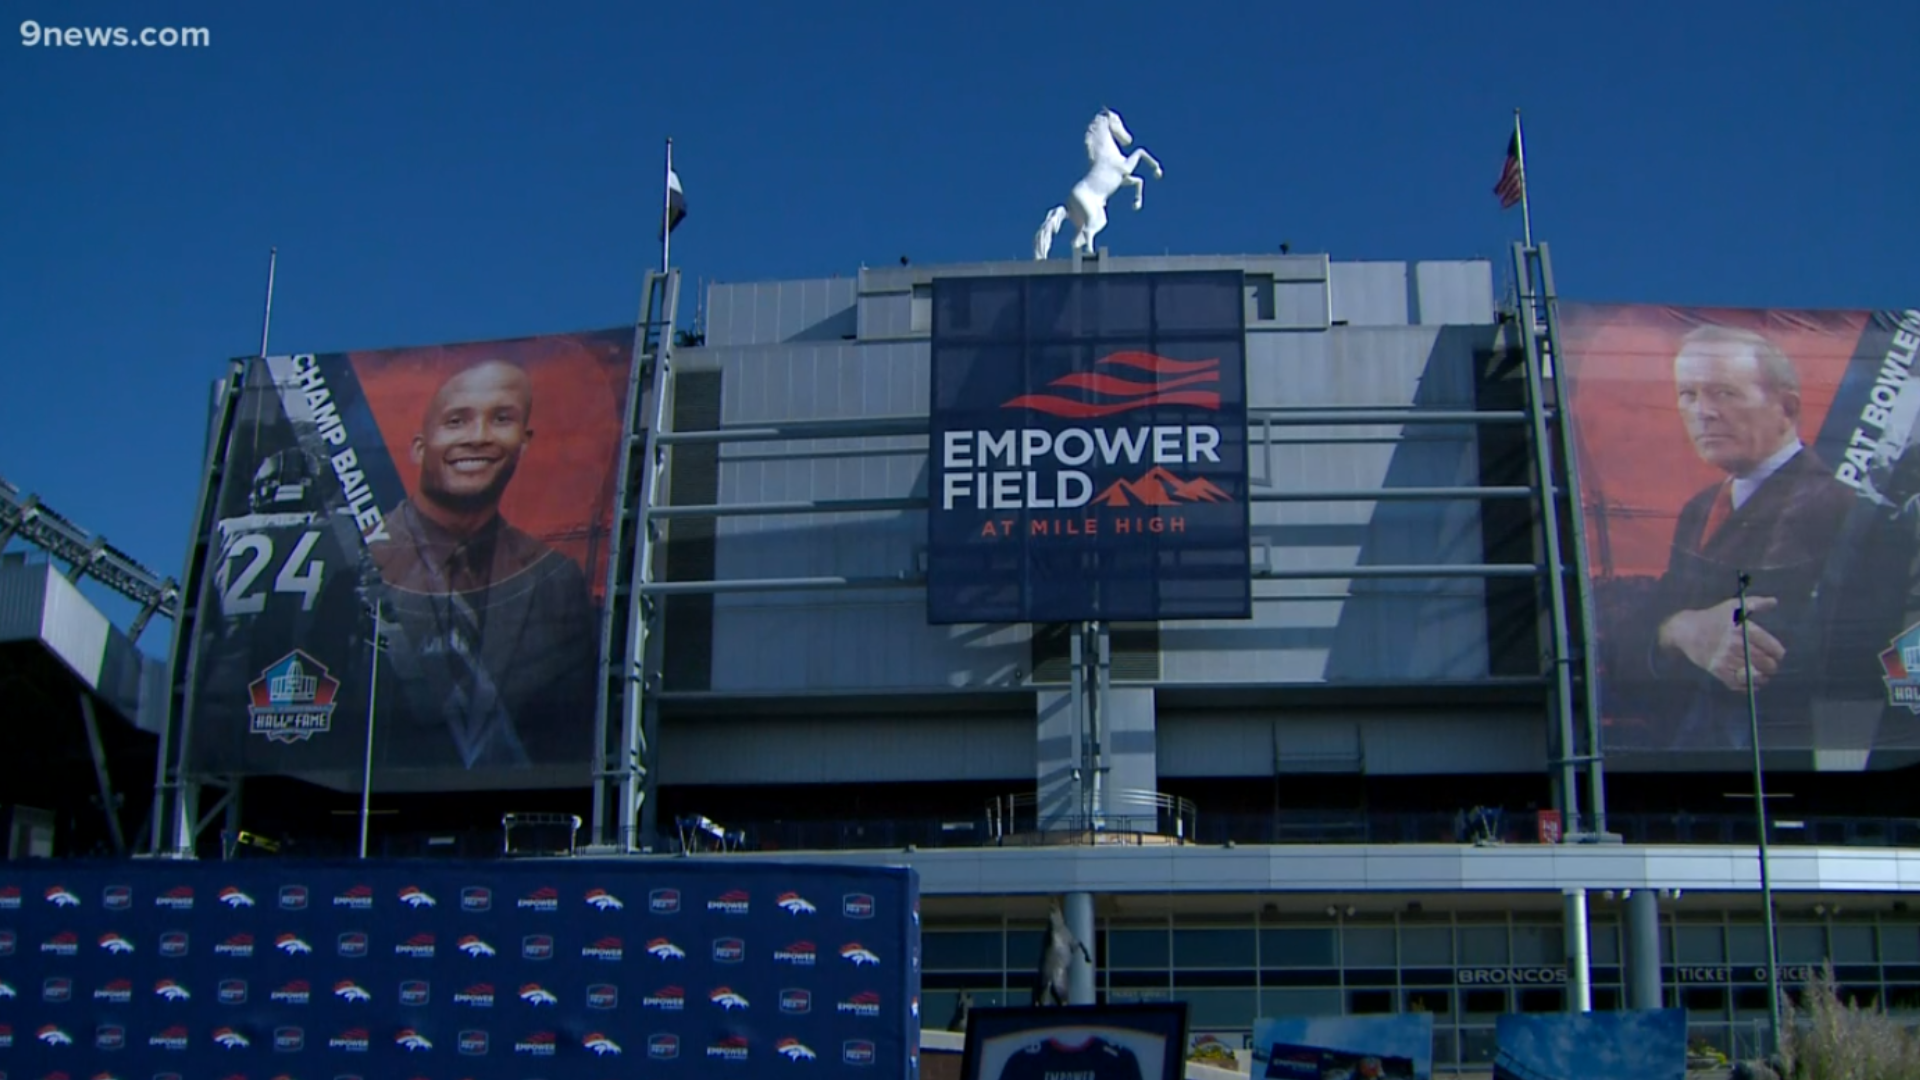 For the next 21 years, the Denver Broncos will be playing at the newly named stadium of “Empower Field at Mile High.” The Broncos and Greenwood Village-based Empower Retirement formalized an agreement late Tuesday night that will place the name of the nation’s second-largest retirement plan provider on the face of the team’s stadium through the 2039 season. The Broncos and Metropolitan Football Stadium District introduced the new name in a ceremony on Thursday, Sept. 5, 2019 in Denver, Colorado.